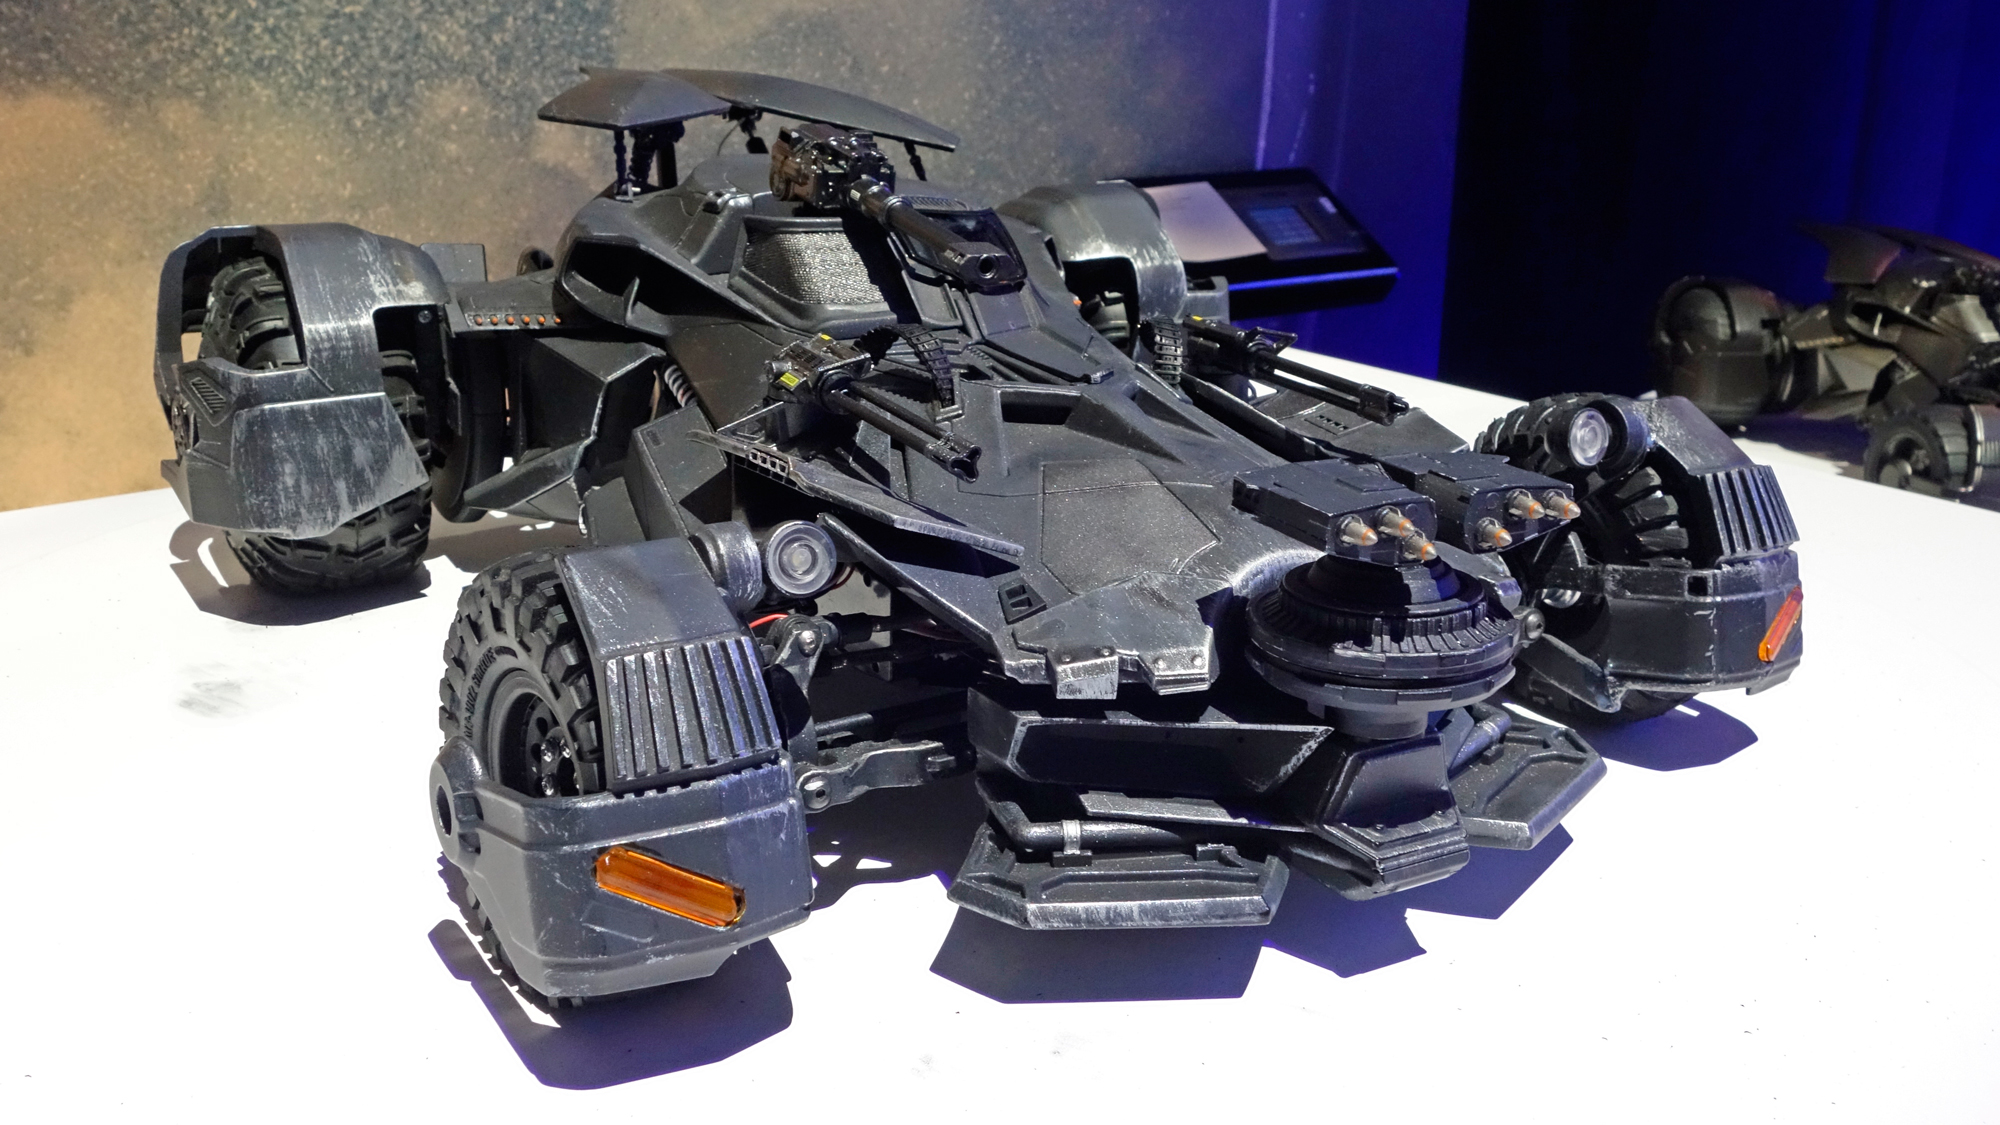 This RC Batmobile Has A Real Working Exhaust That Blows Smoke And Our Minds